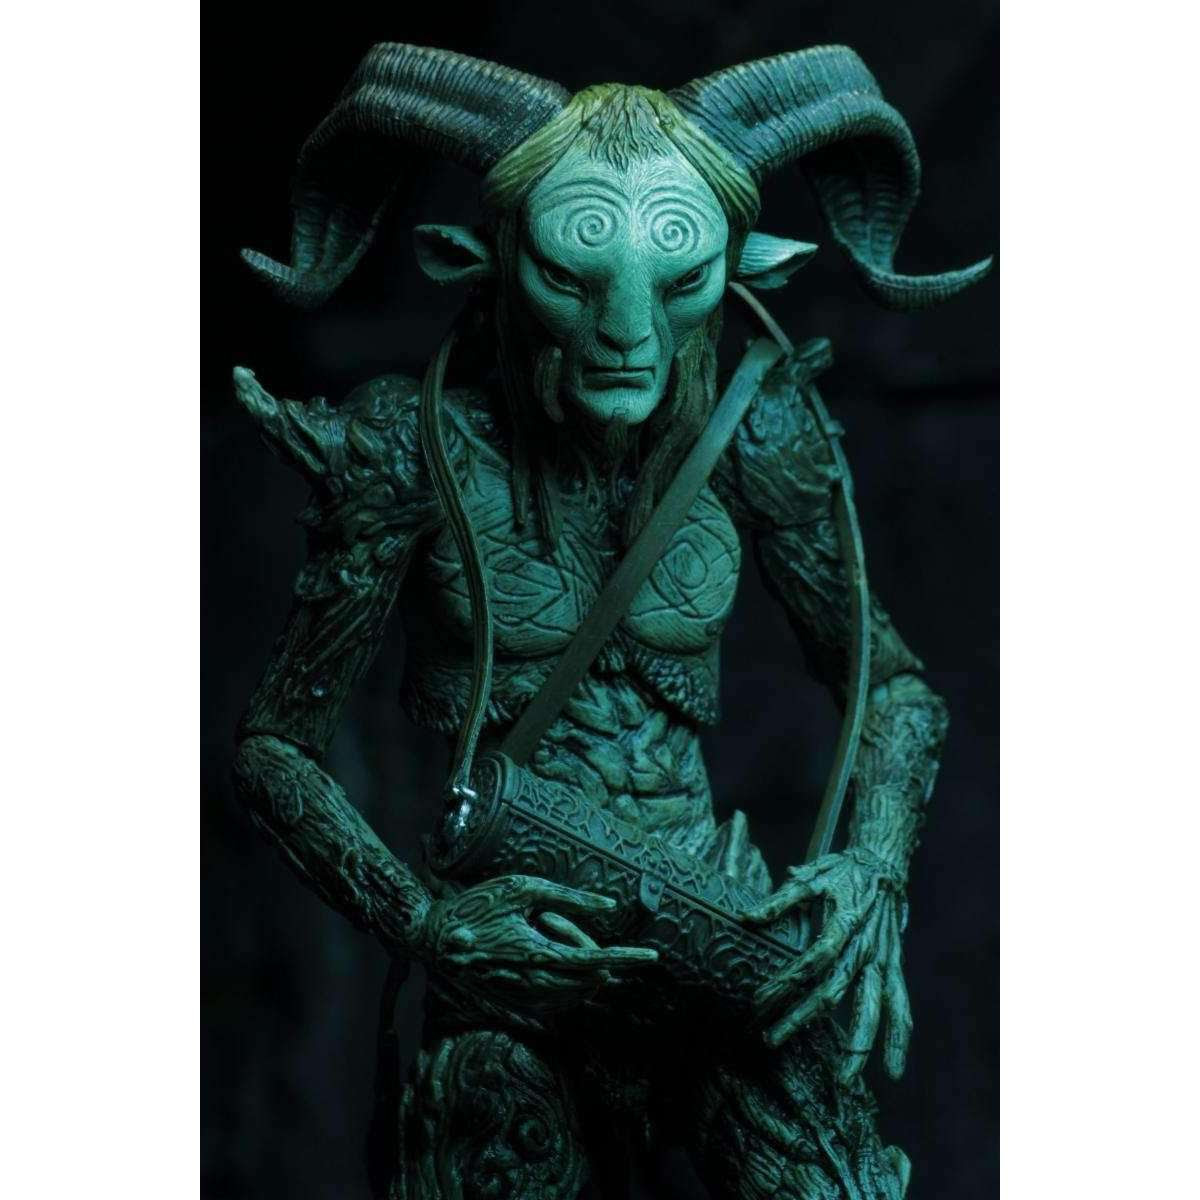 Image of Guillermo Del Toro Signature Collection - 7" Scale Action Figure - Faun (Pan&squot;s Labyrinth) - Q2 2019